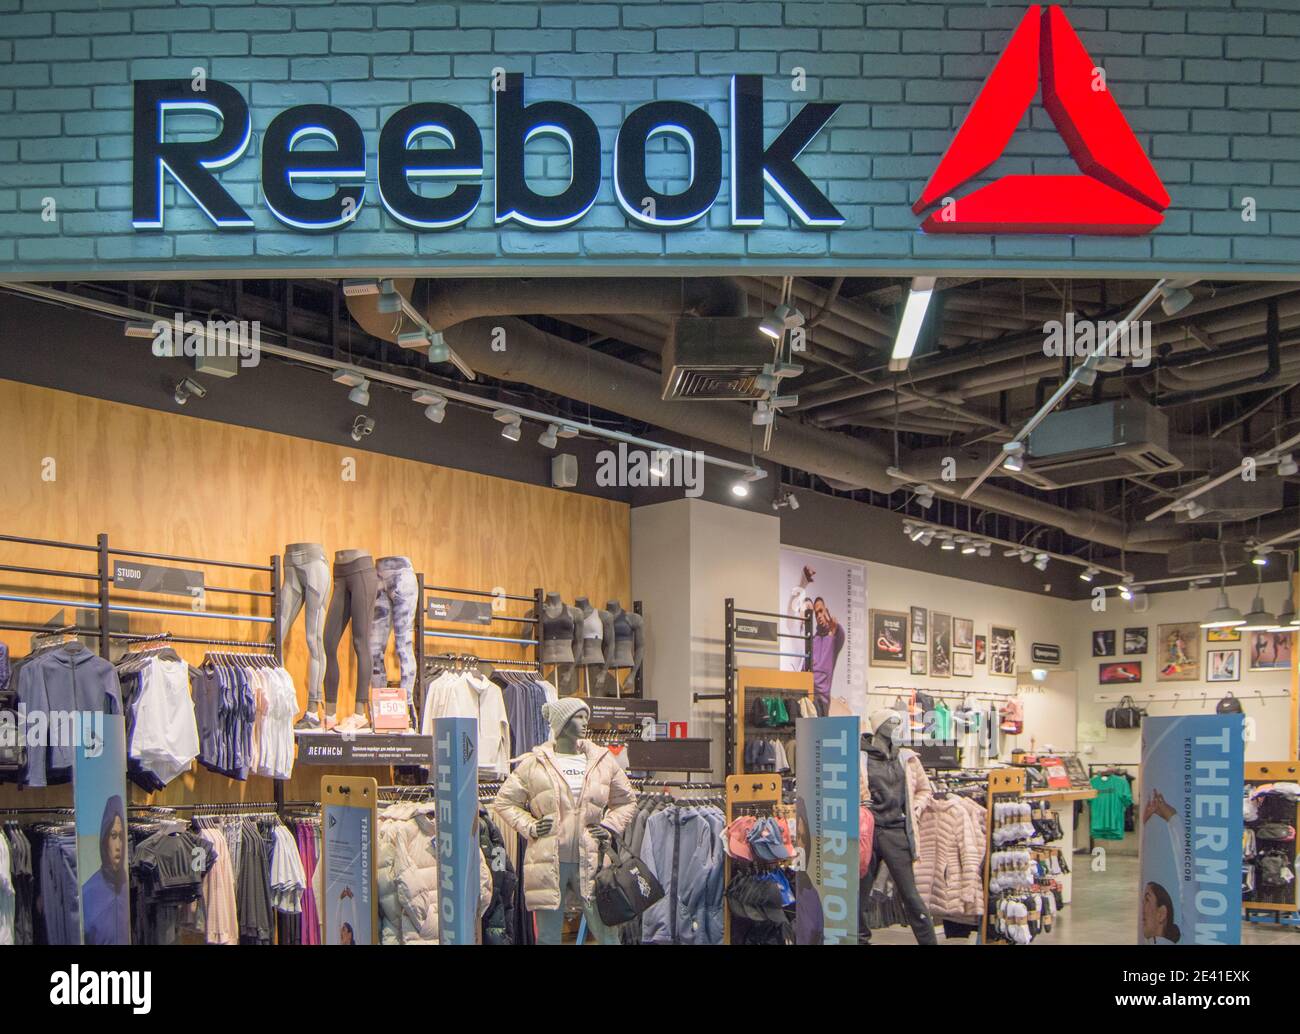 Moscow, Russia - October 8, 2019: Reebok brand store in the Europolis shopping in Moscow. Modern interior of a sportswear retail store Stock Photo - Alamy